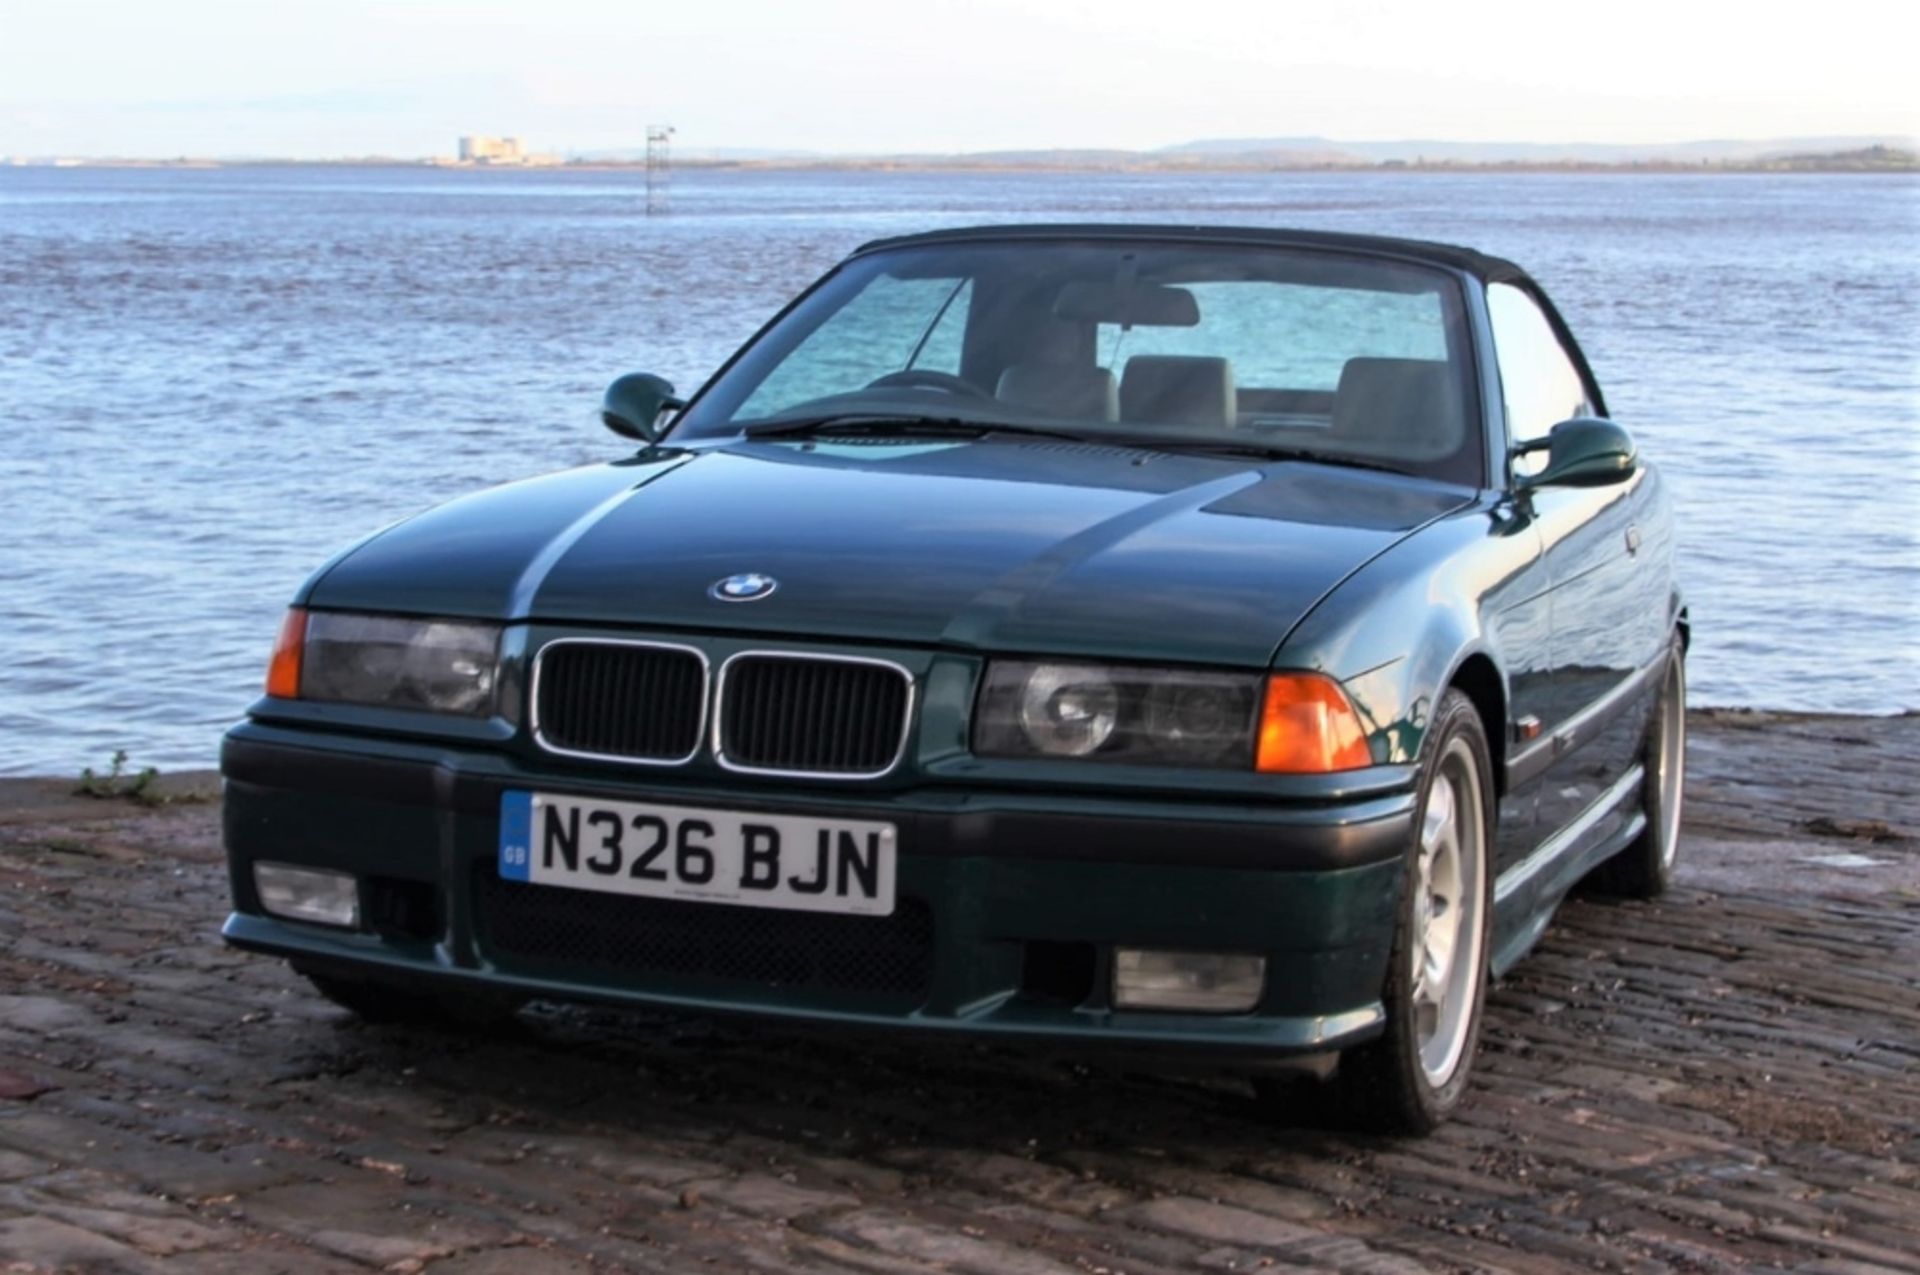 1995 BMW M3 Convertible - Image 3 of 15